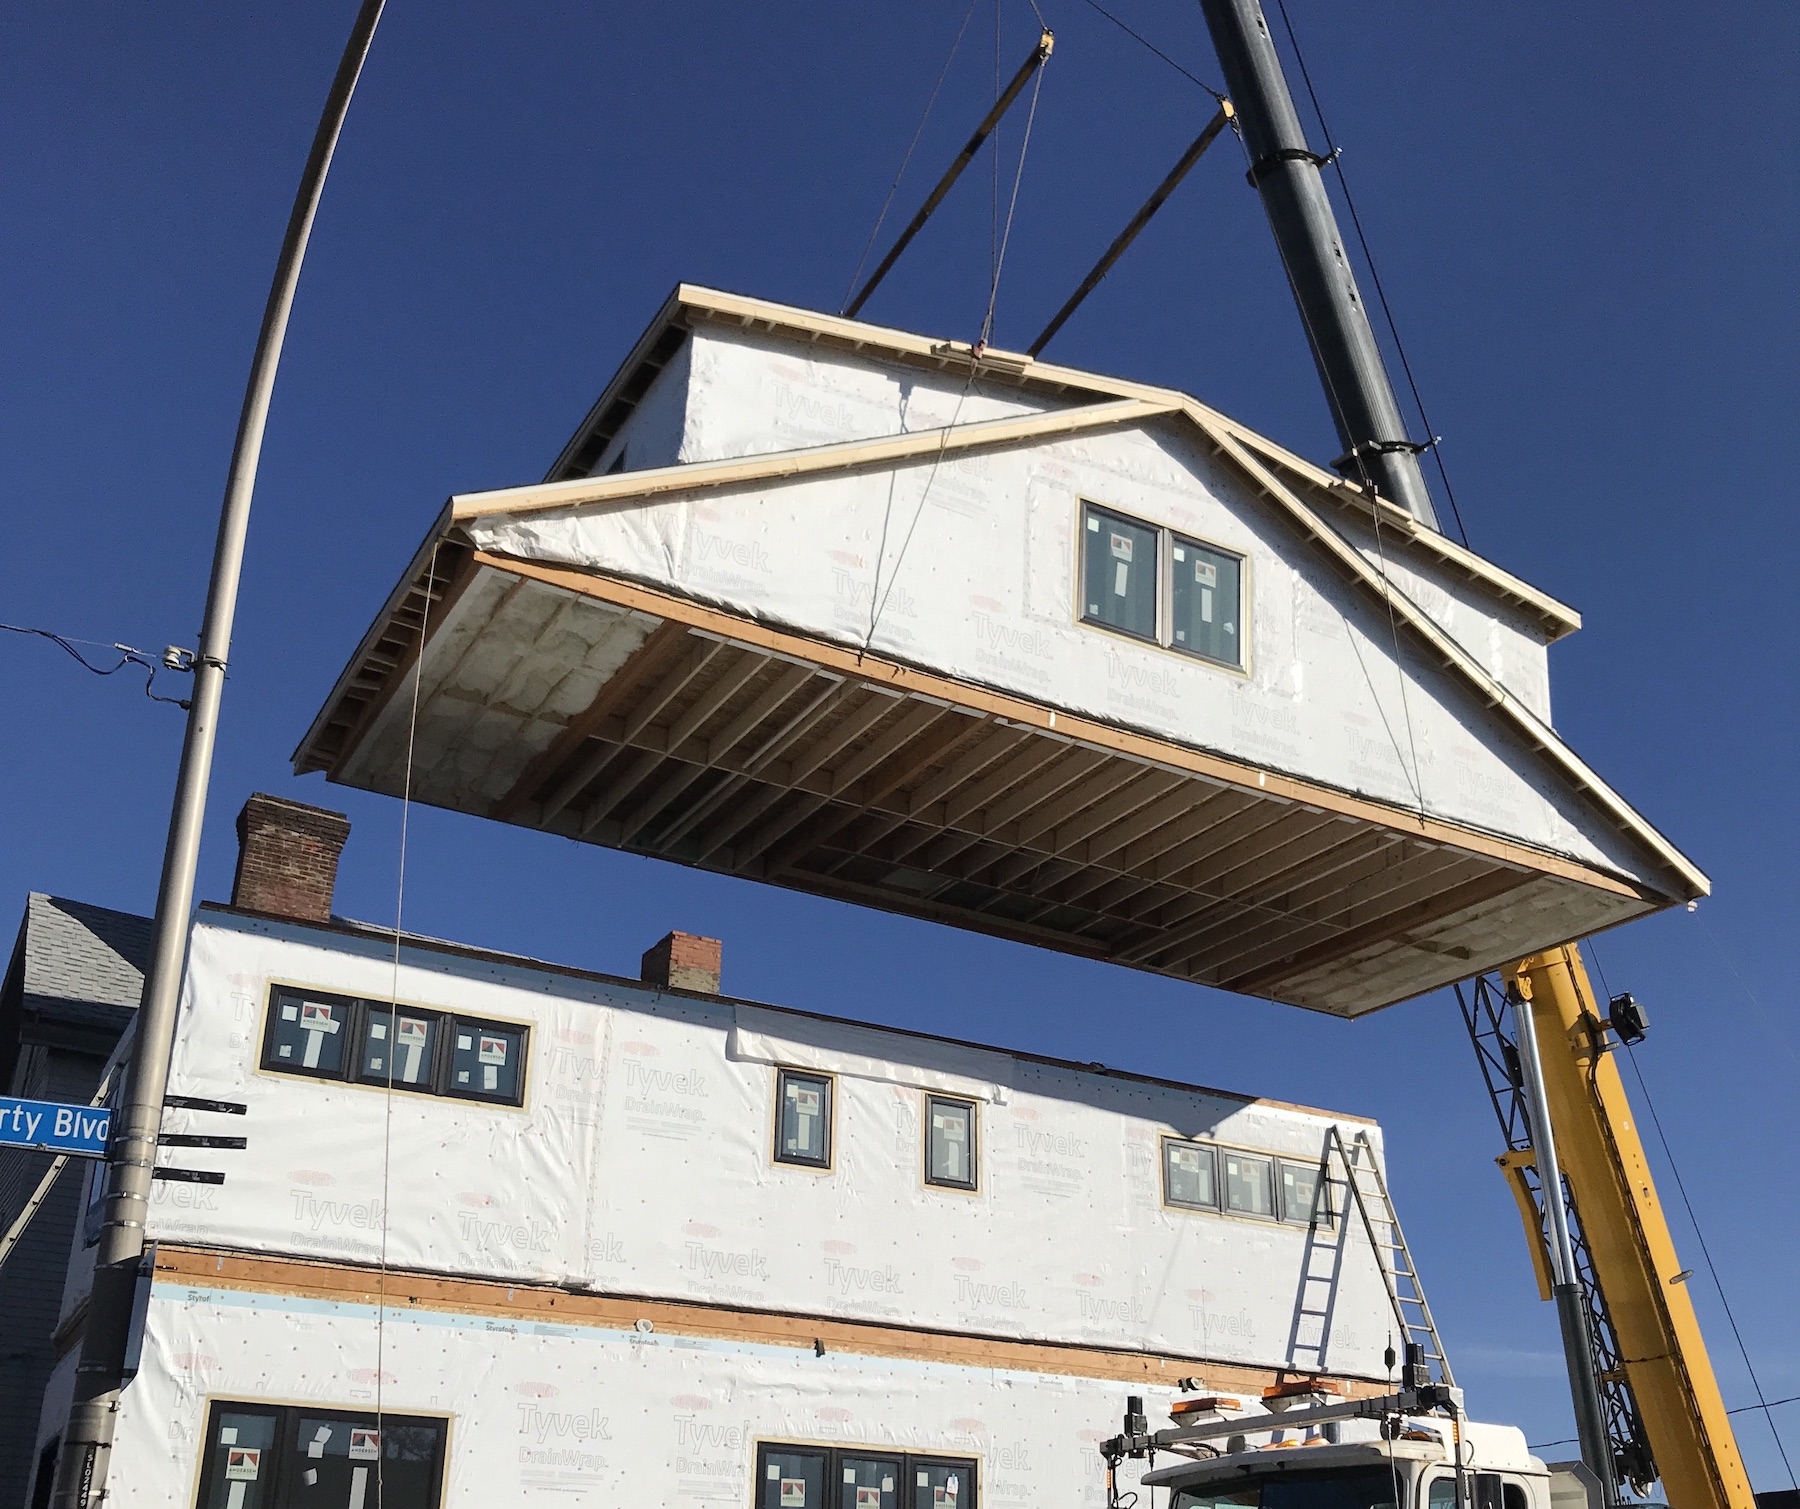 Module project shows residential attic being placed atop of existing modular pieces